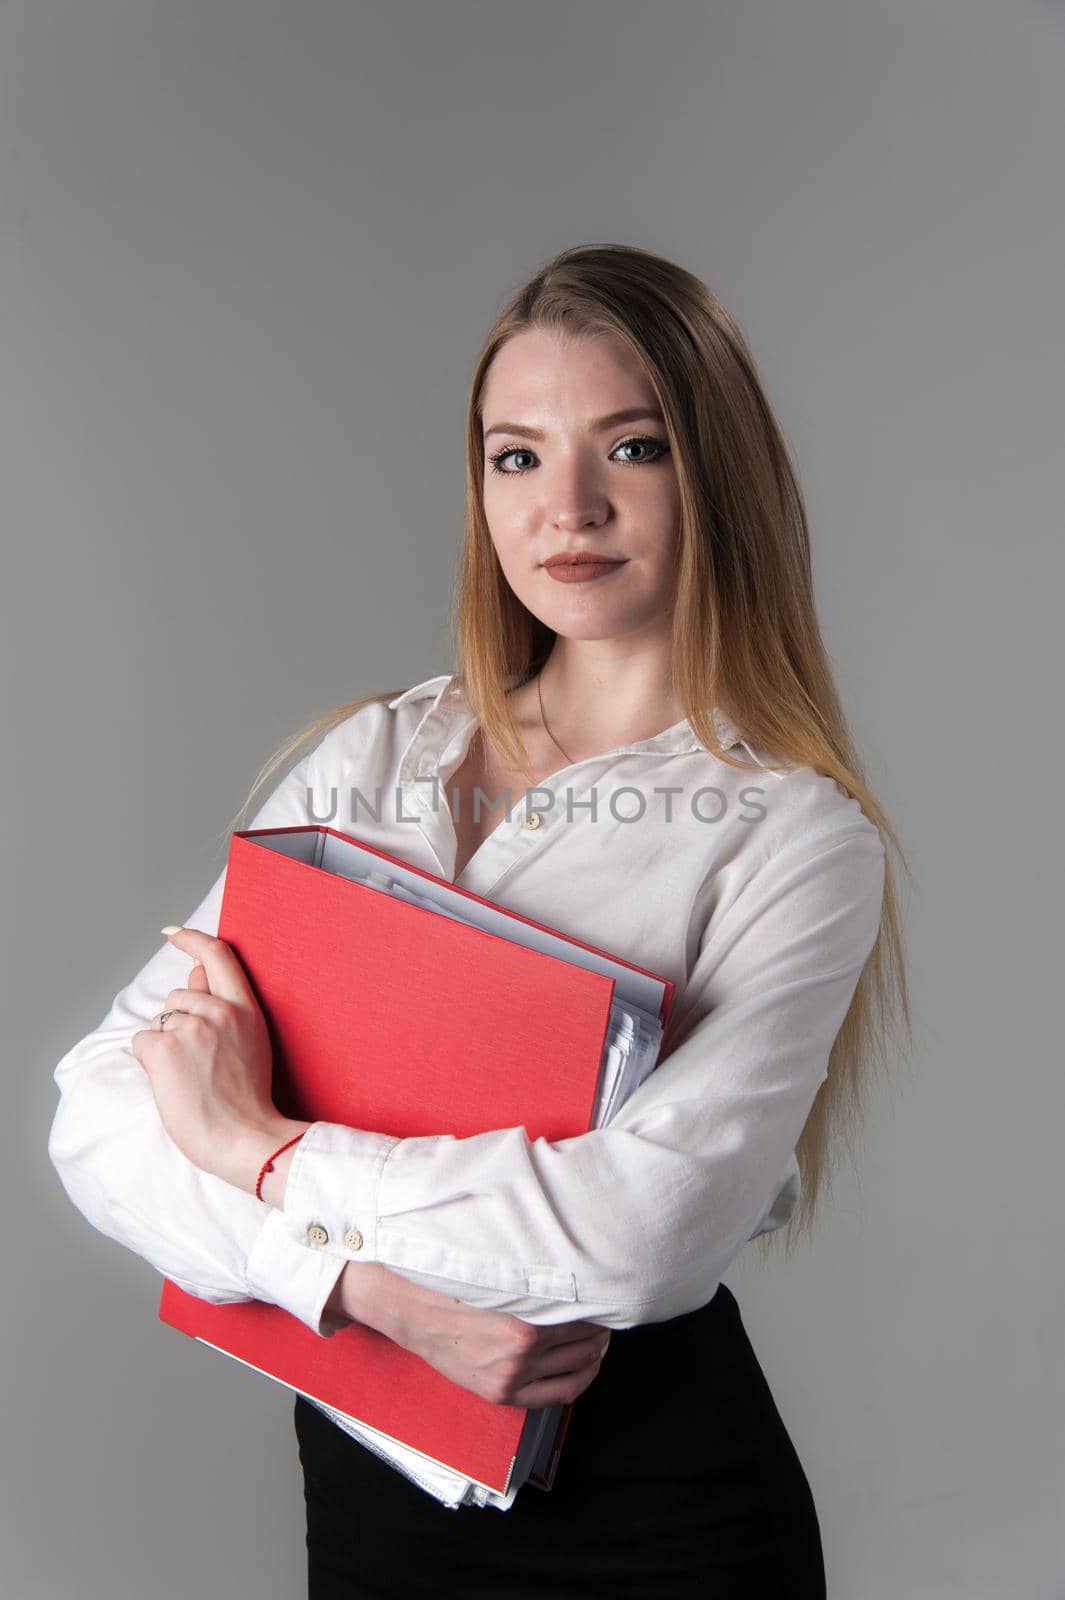 Portrait of a young attractive woman with blond hair on a neutral gray background. Red folder in hand.